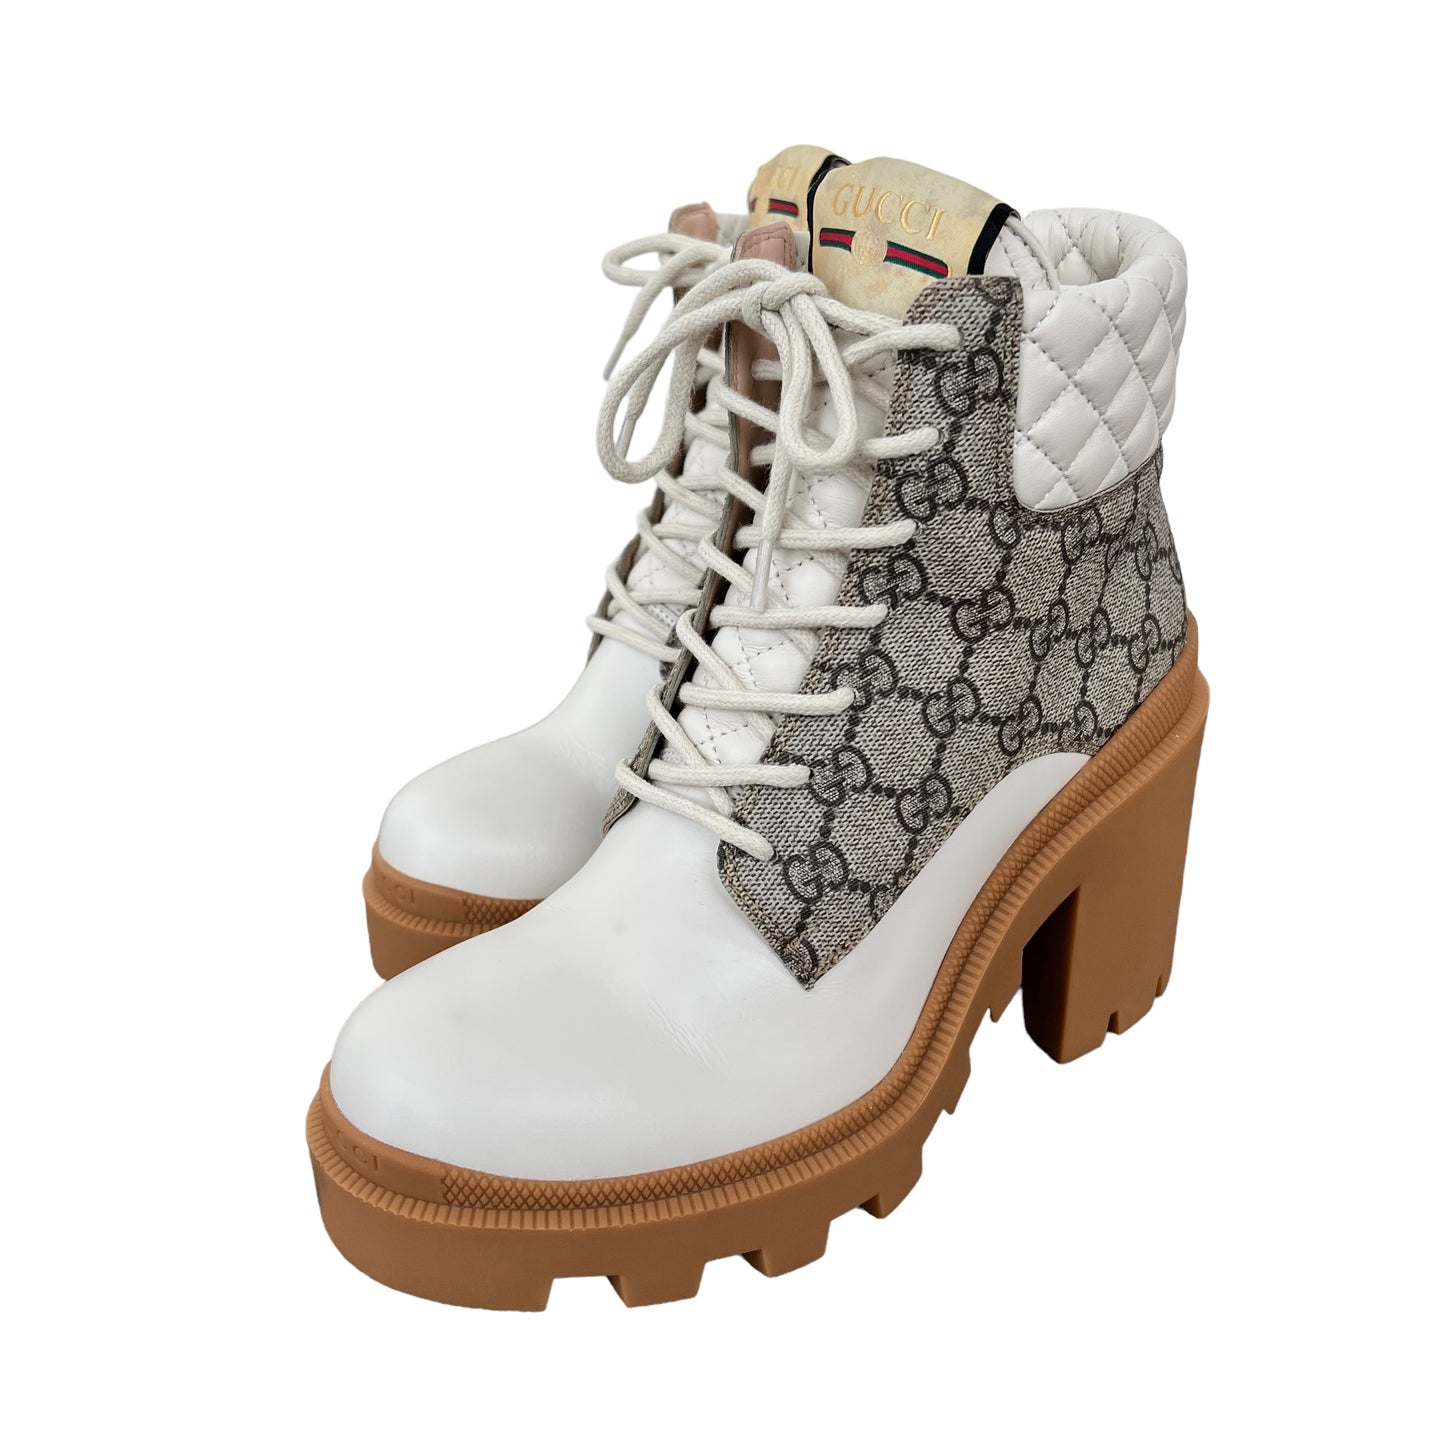 New! Gucci GG Ankle Leather Boots